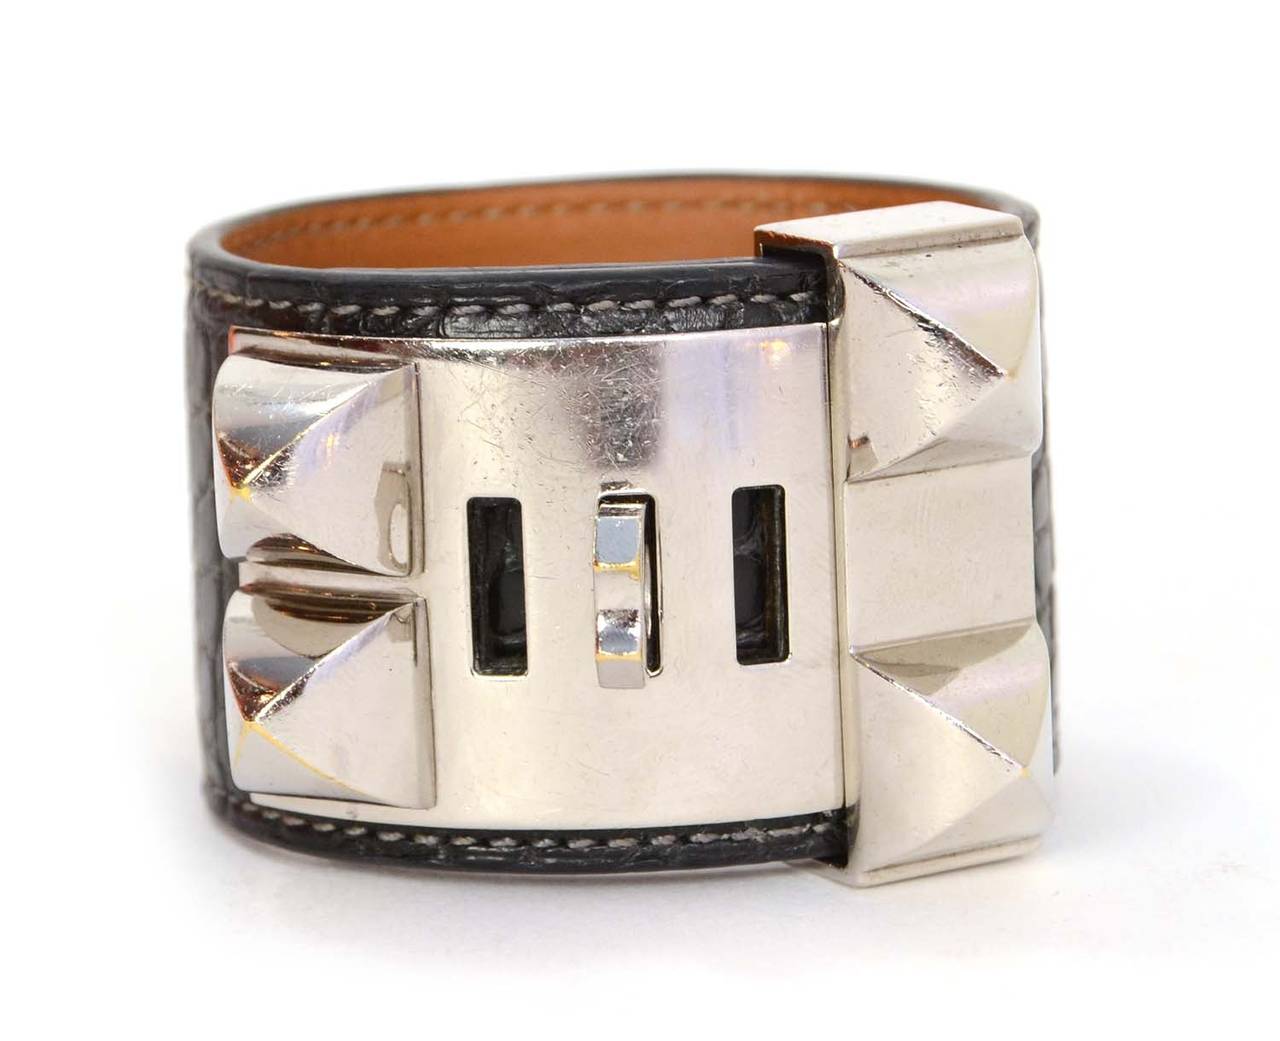 Hermes Graphite Crocodile Collier De Chien CDC Cuff
Made in: France
Year of Production: 2012
Stamp: P stamp in square
Closure: Stud and notch closure
Color: Graphite and silvertone
Materials: Crocodile, leather lining and palladium